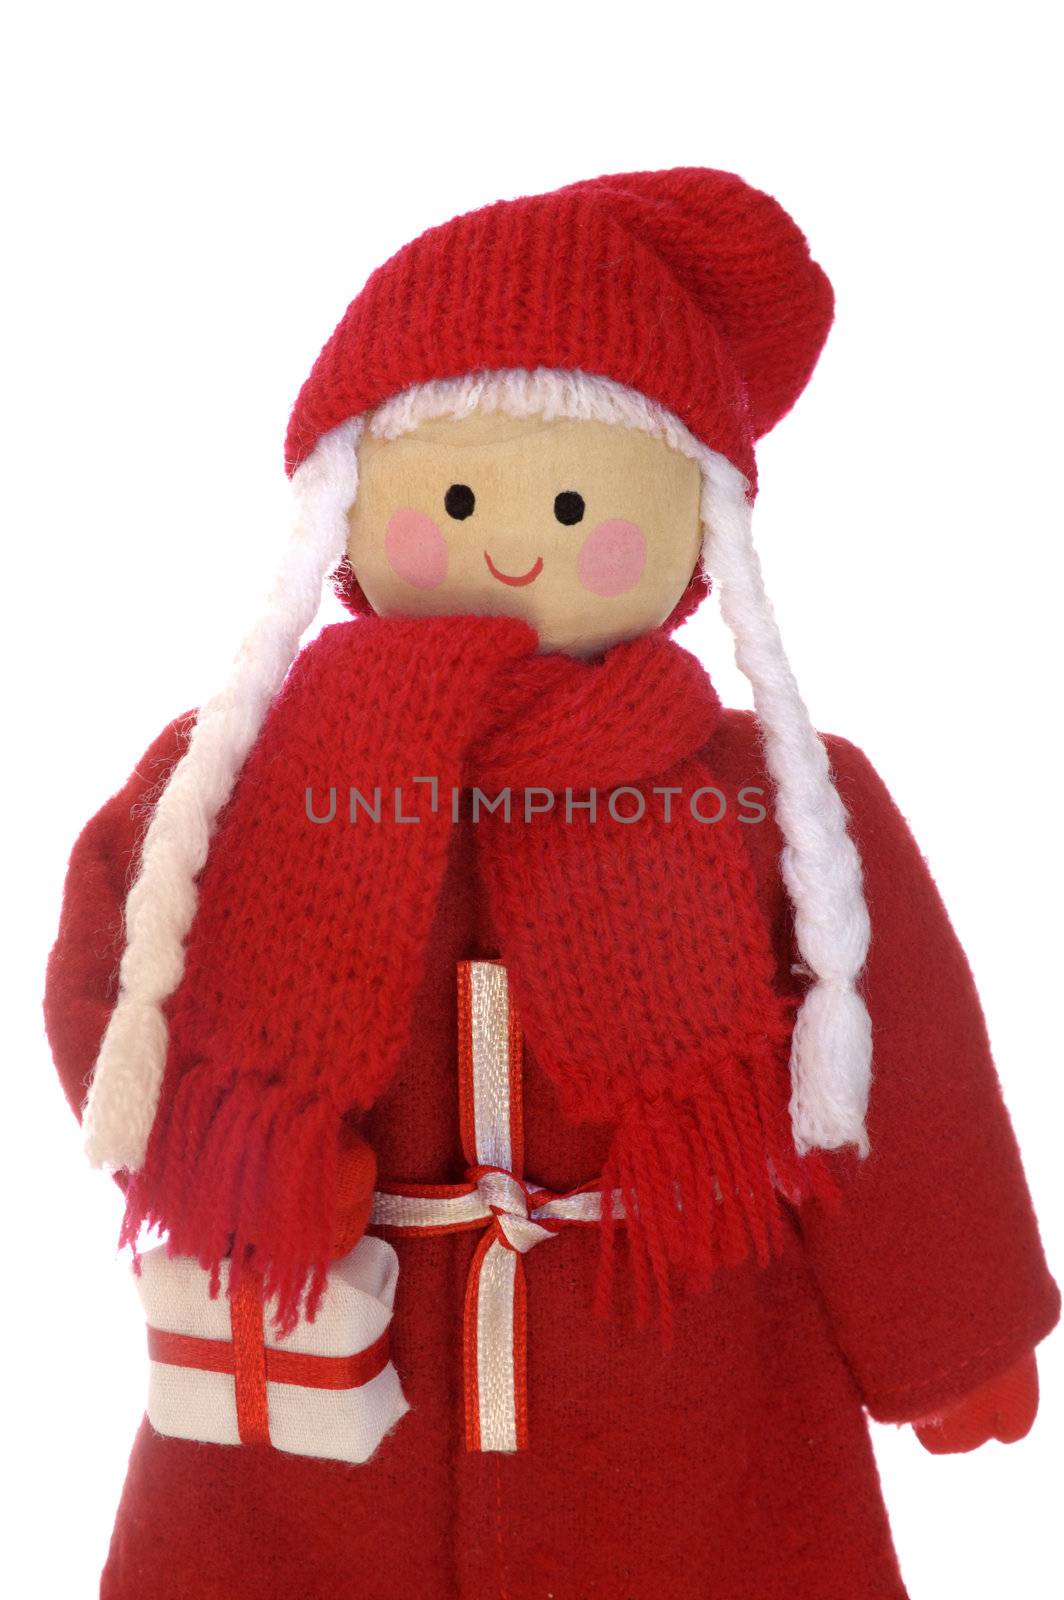 A wooden Mother Christmas doll, holding a present, isolated on a white background. Space for text.